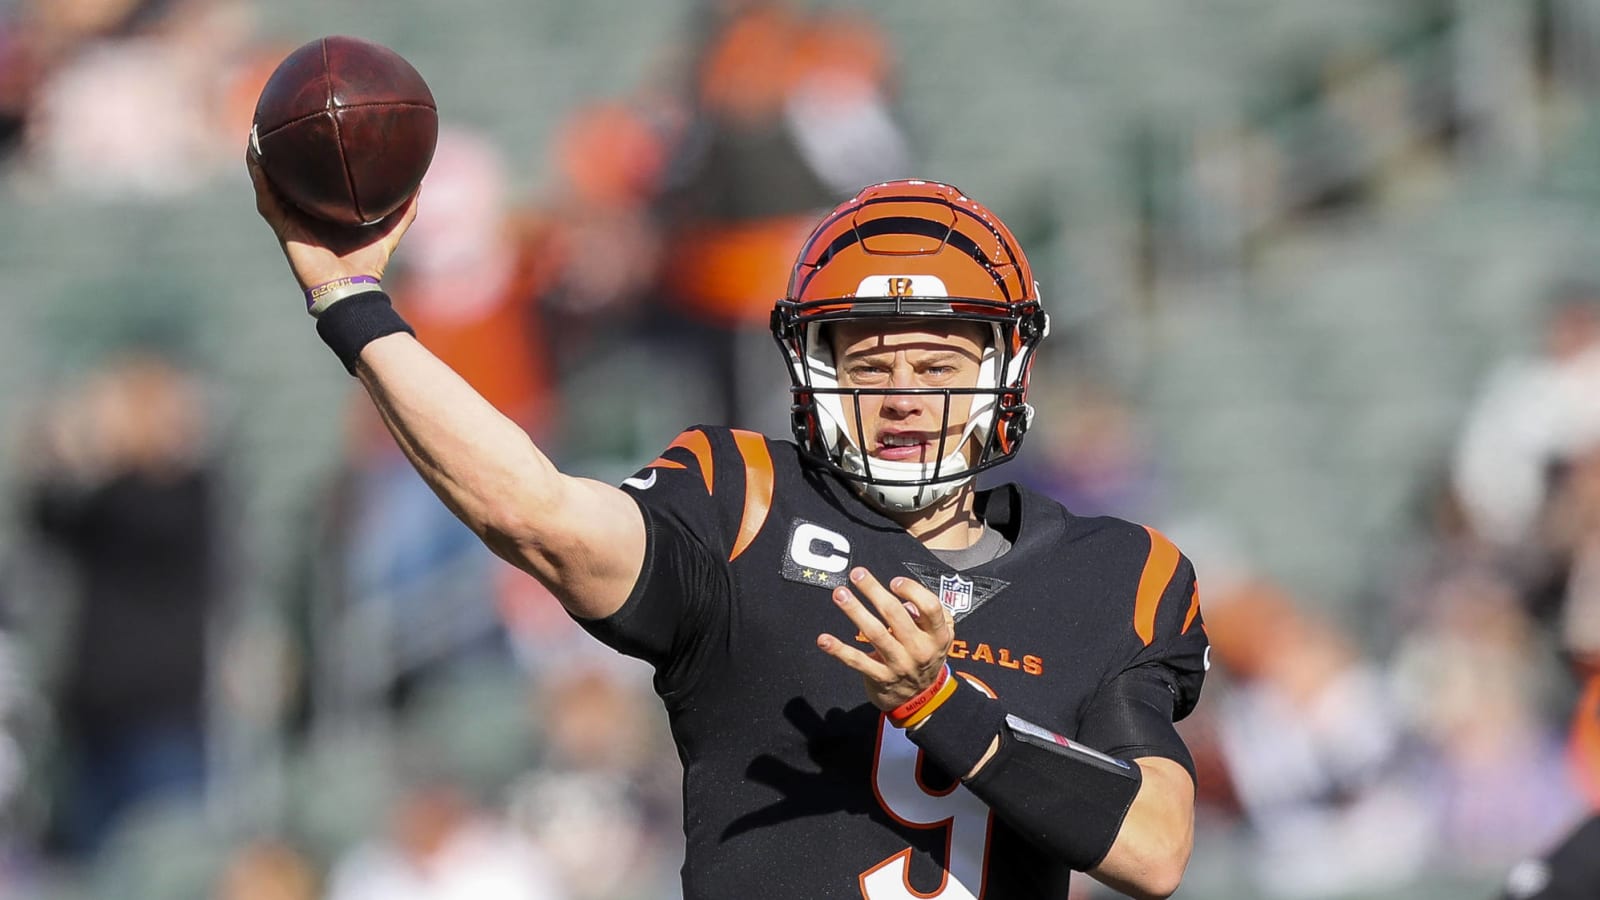 Joe Burrow throws for 525 yards as Bengals rout Ravens 